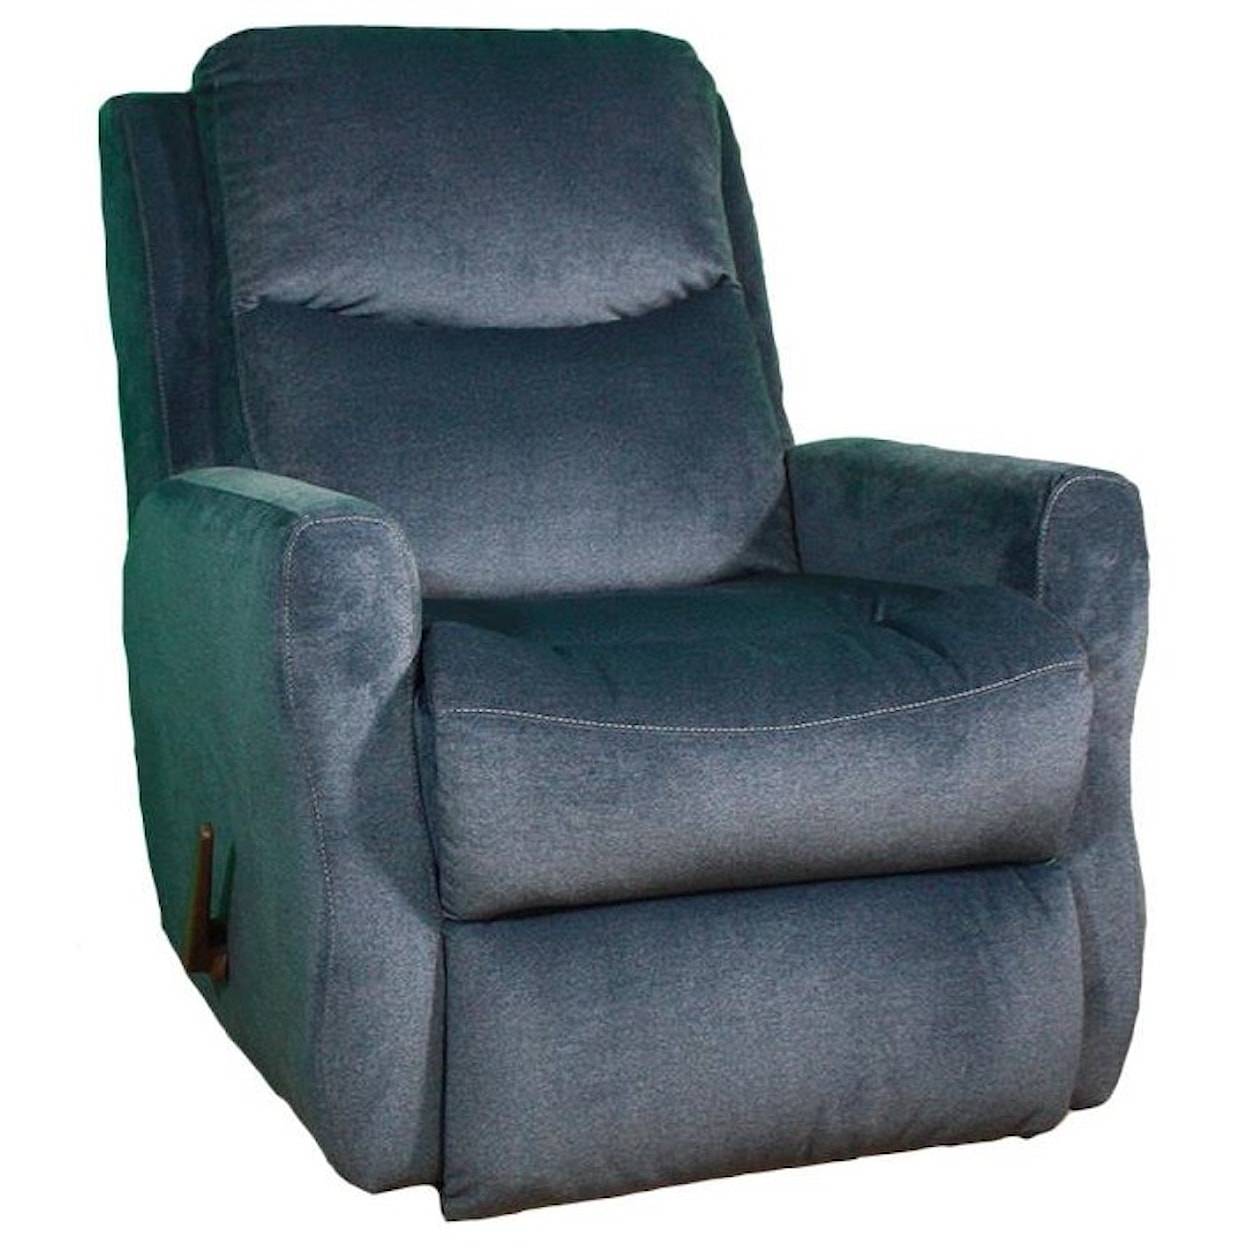 Southern Motion Recliners Fame Rocker Recliner